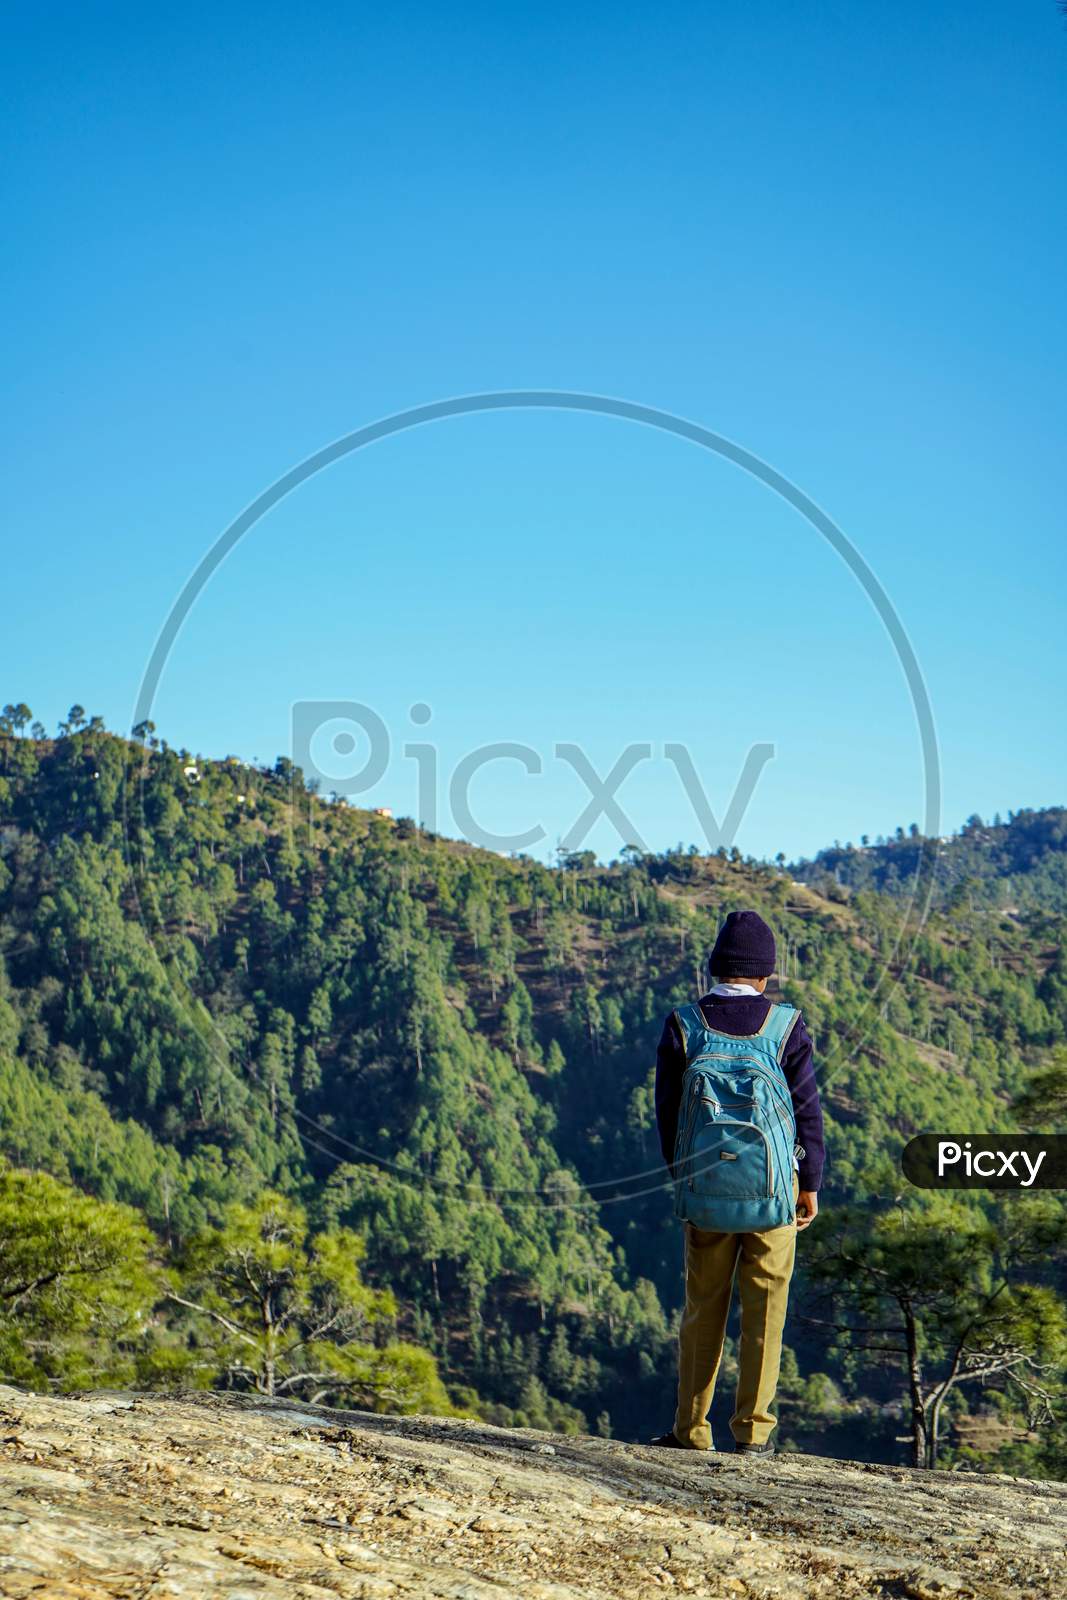 Almora, Uttrakhand / India- May 30 2020 : A School Boy Standing On The Cliff Of A Mountain With Beautiful Blue Sky Overhead.